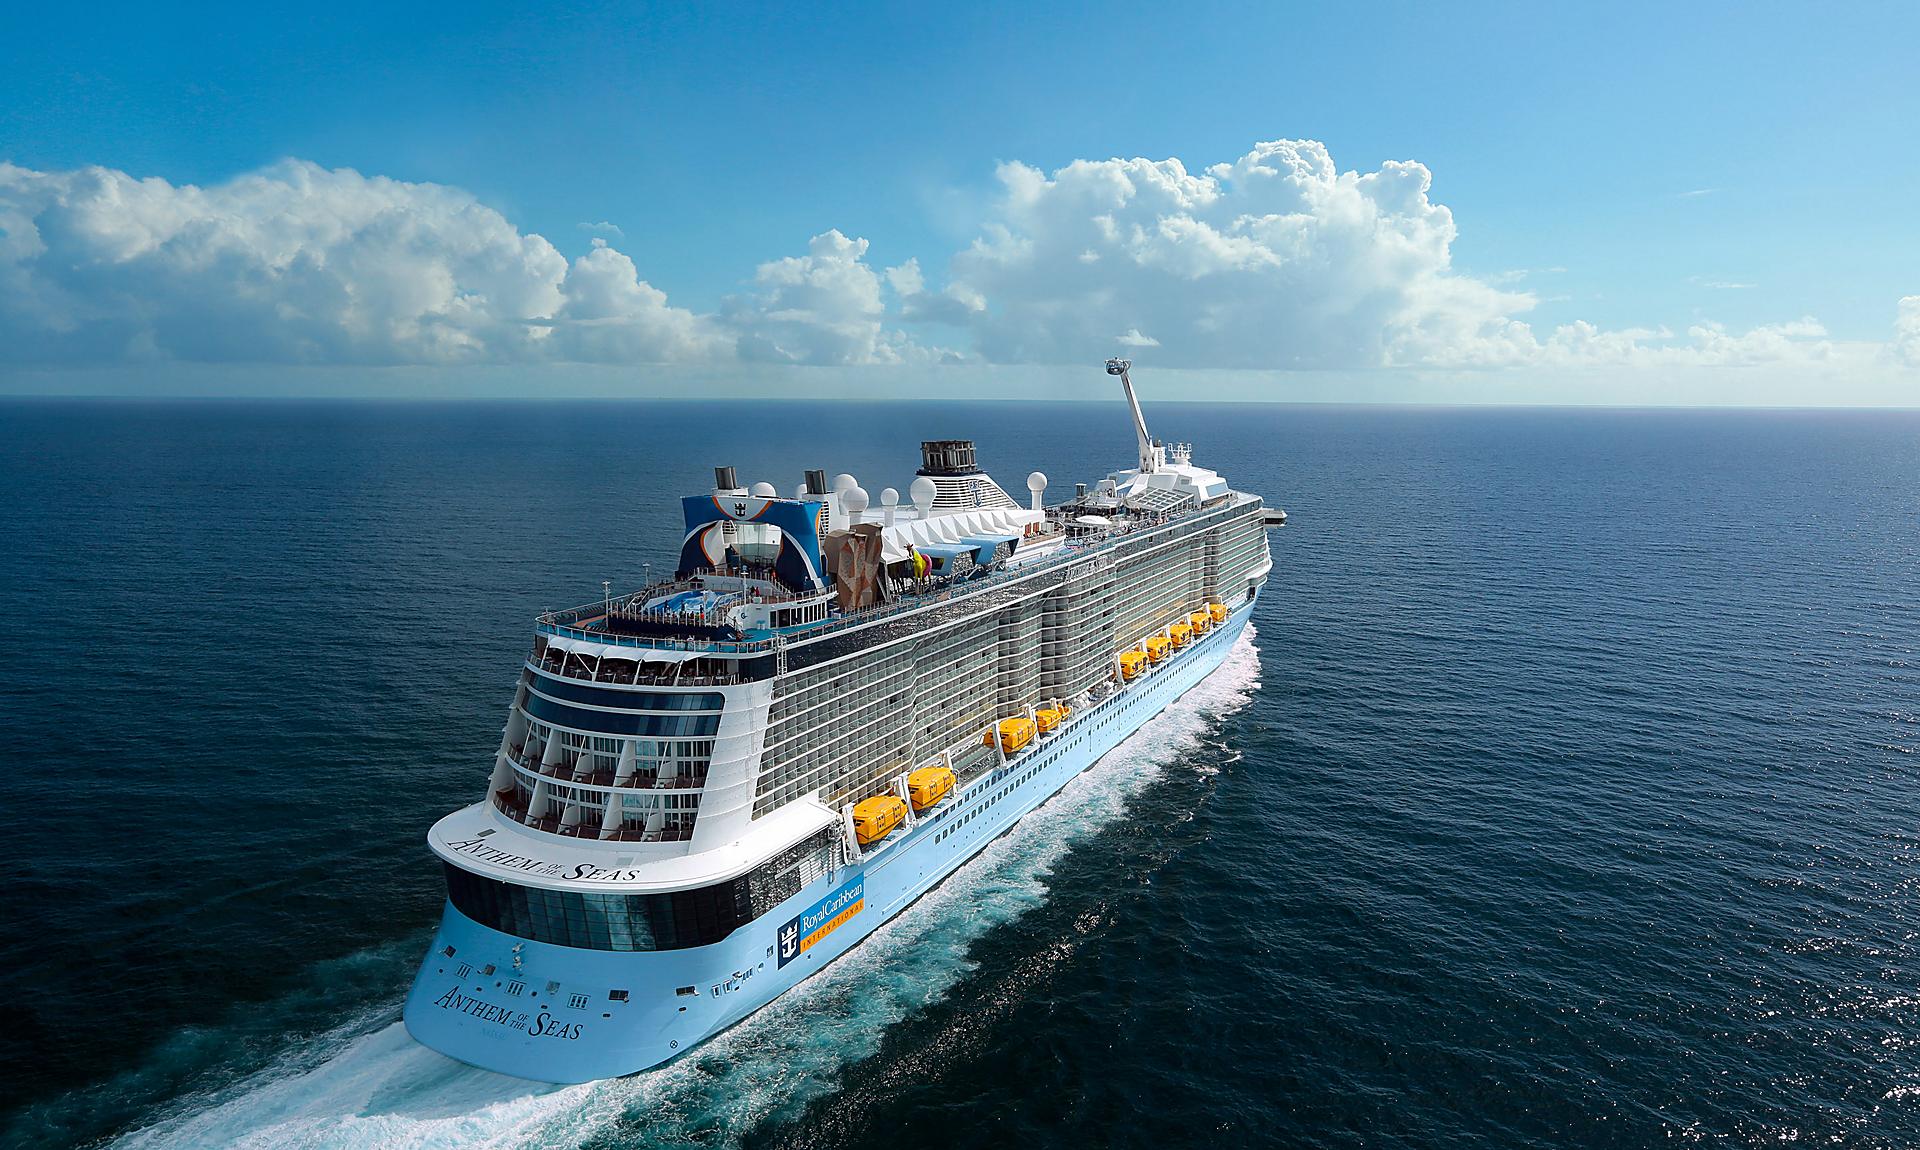 Royal Caribbean&#39;s Anthem of the Seas will sail from UK in Summer 2021 | Royal Caribbean Blog